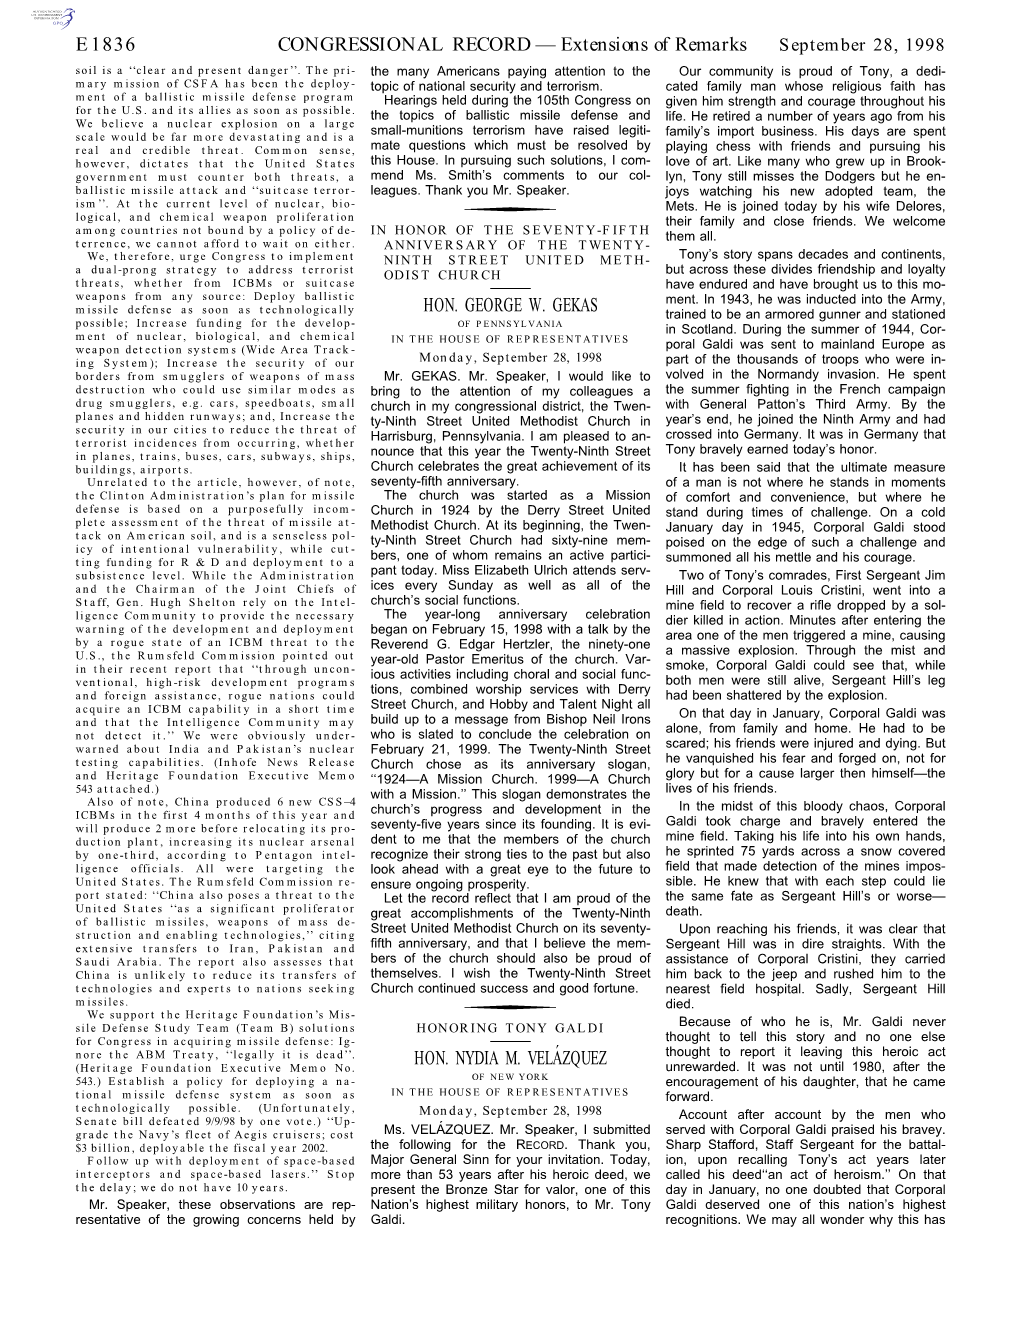 CONGRESSIONAL RECORD— Extensions of Remarks E1836 HON. GEORGE W. GEKAS HON. NYDIA M. VELA´ZQUEZ